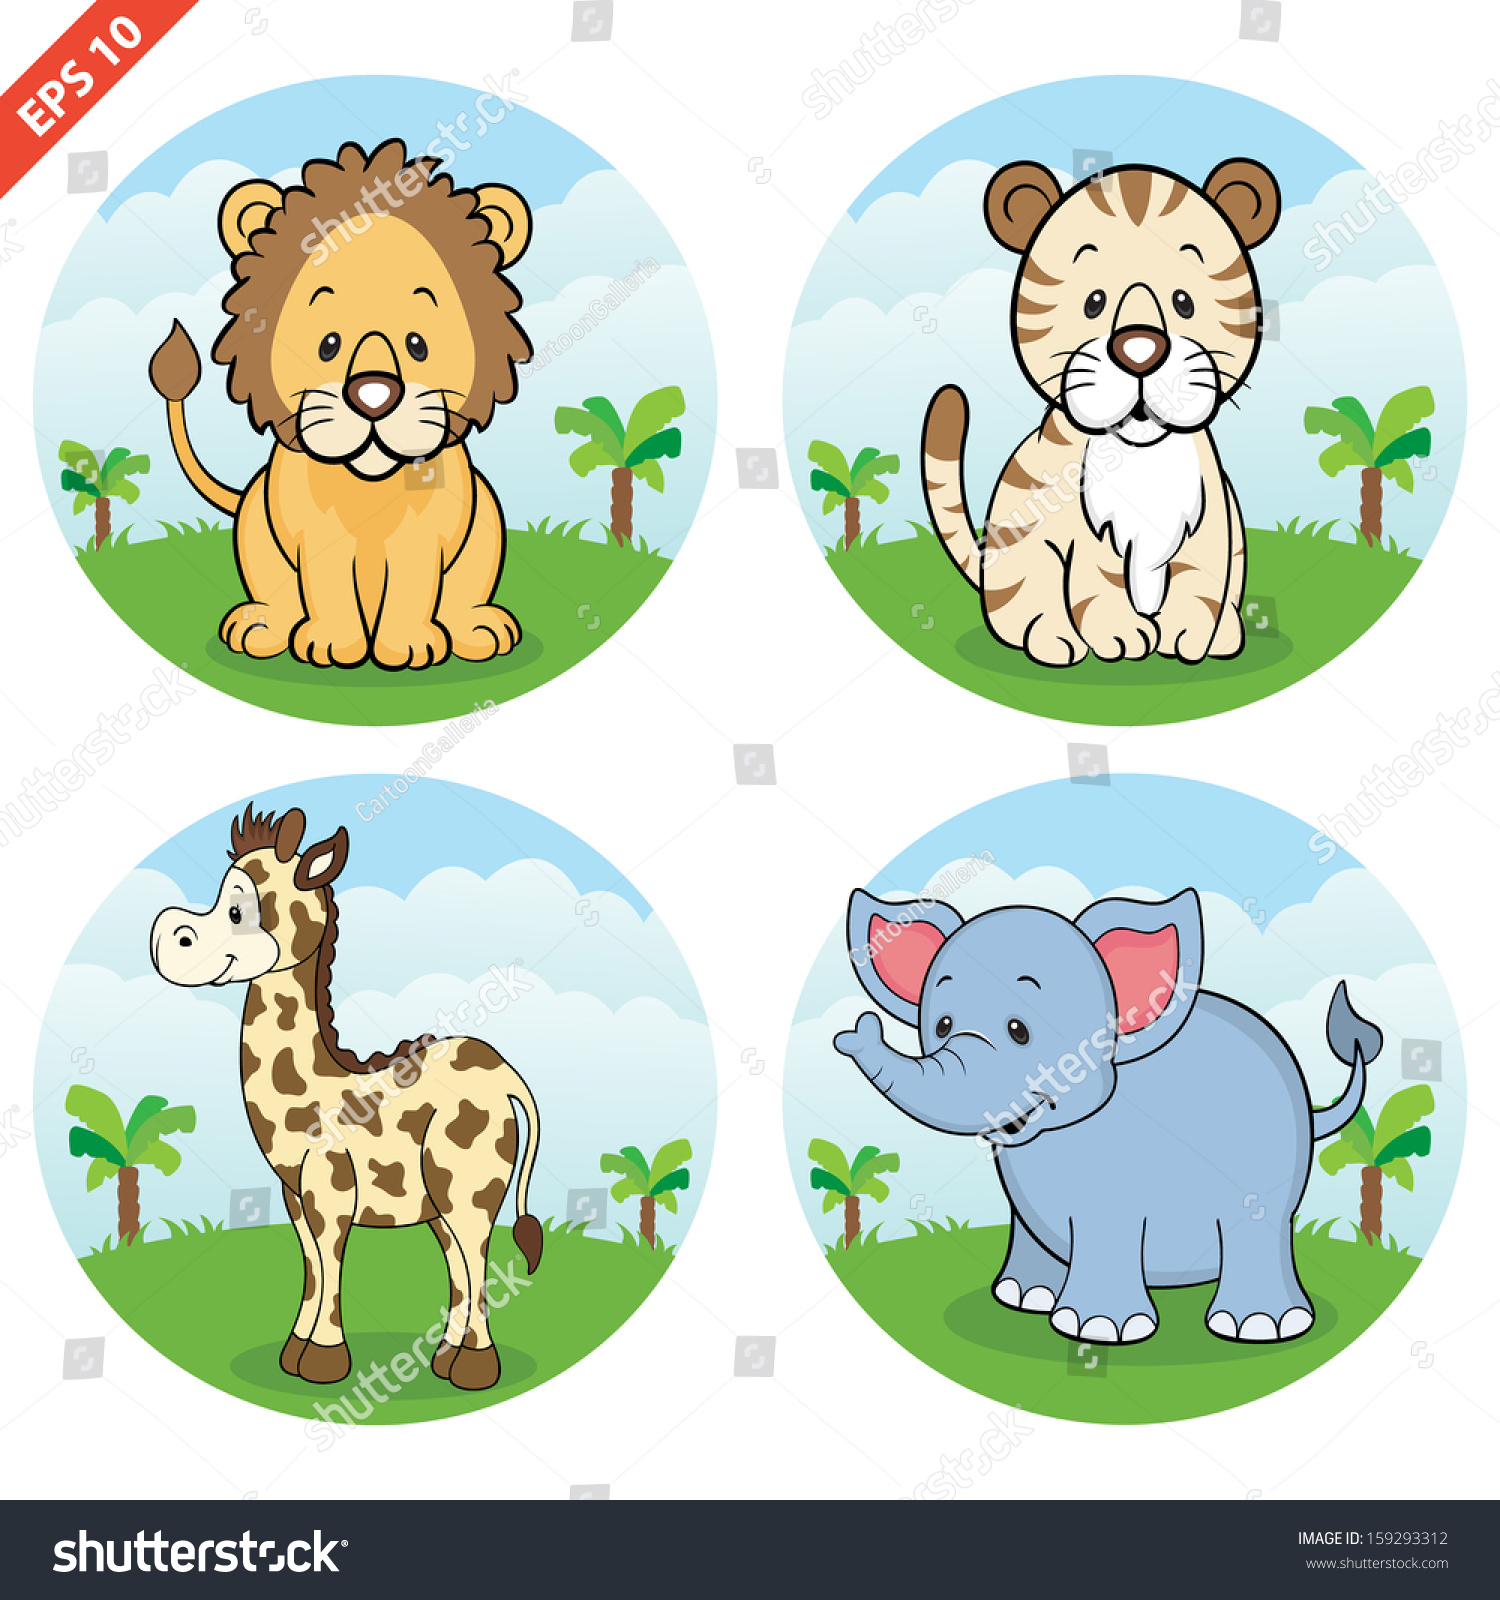 clipart images of domestic animals - photo #42